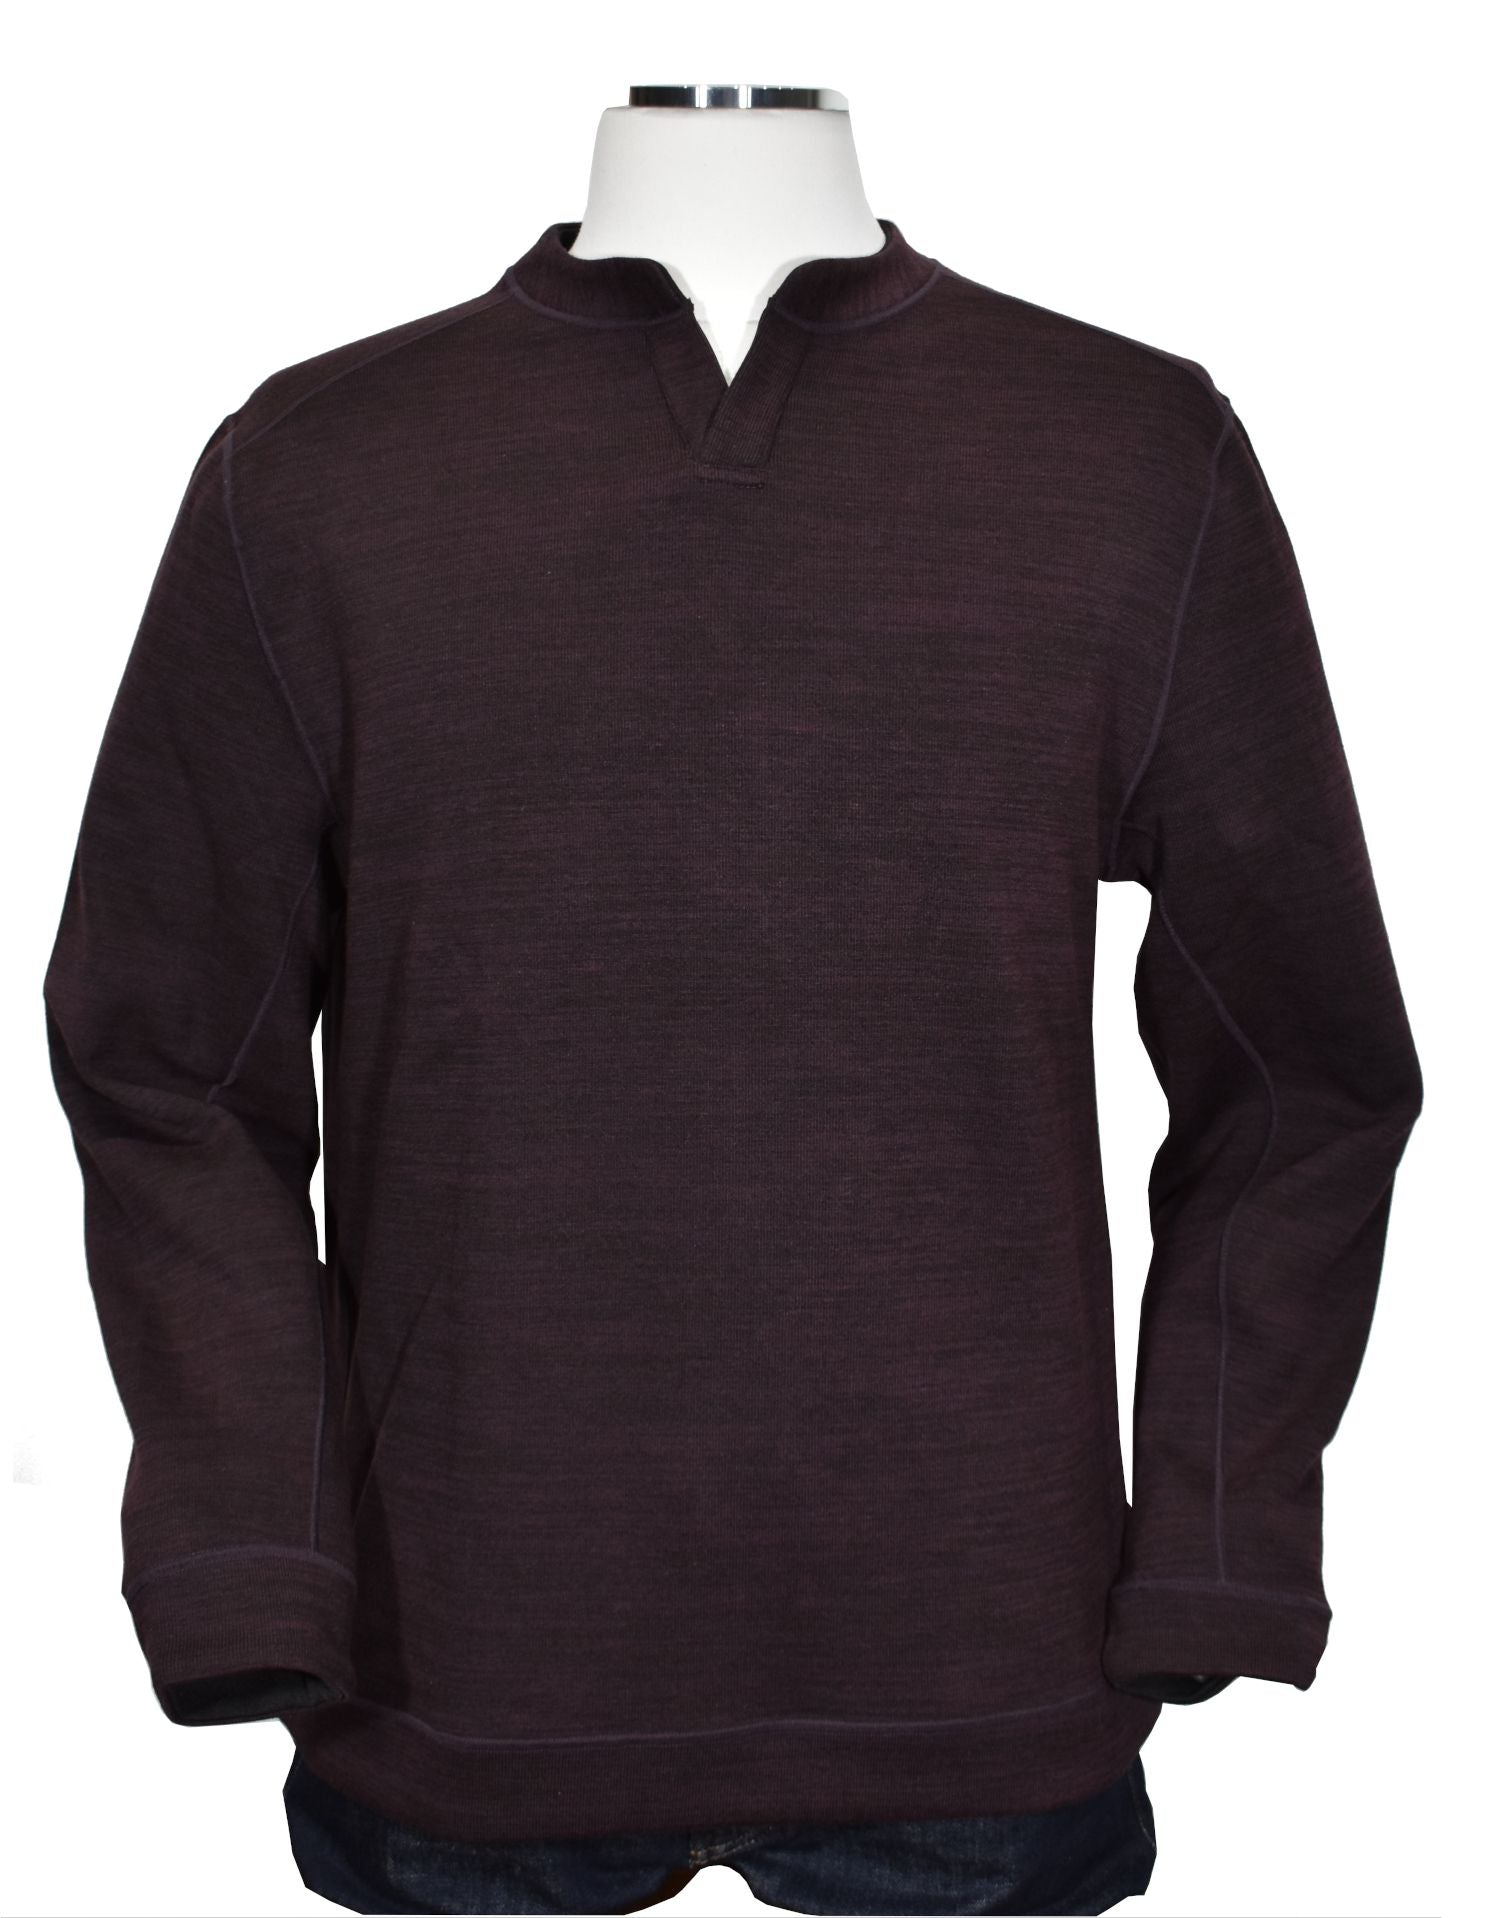  Rock a double look on the go with the ZN5740 Reversible Johnny Crew. Crafted with medium weight cotton microfiber fabric that feels like cashmere, this pullover features a v-neckline, raised welted seams, and a classic fit. Plus, it flips from wine to dark charcoal with a simple spin, so you get two styles in one!